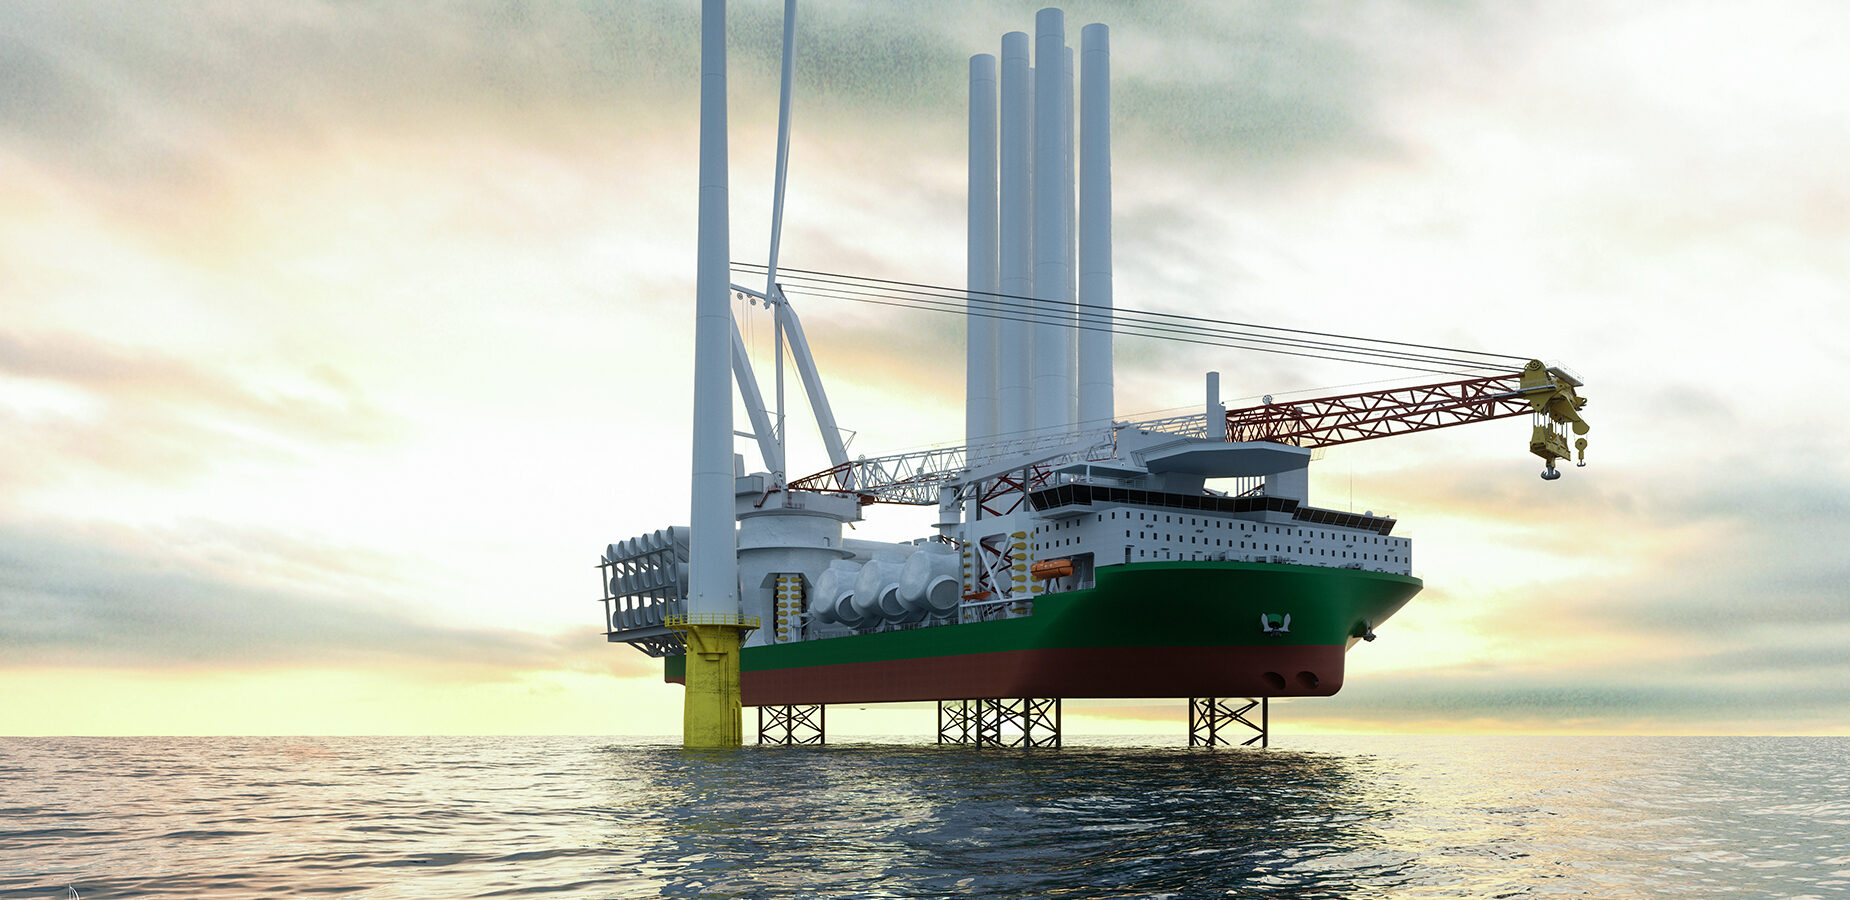 Artist impression of the new jack-up from KNUD E. HANSEN installing wind turbines